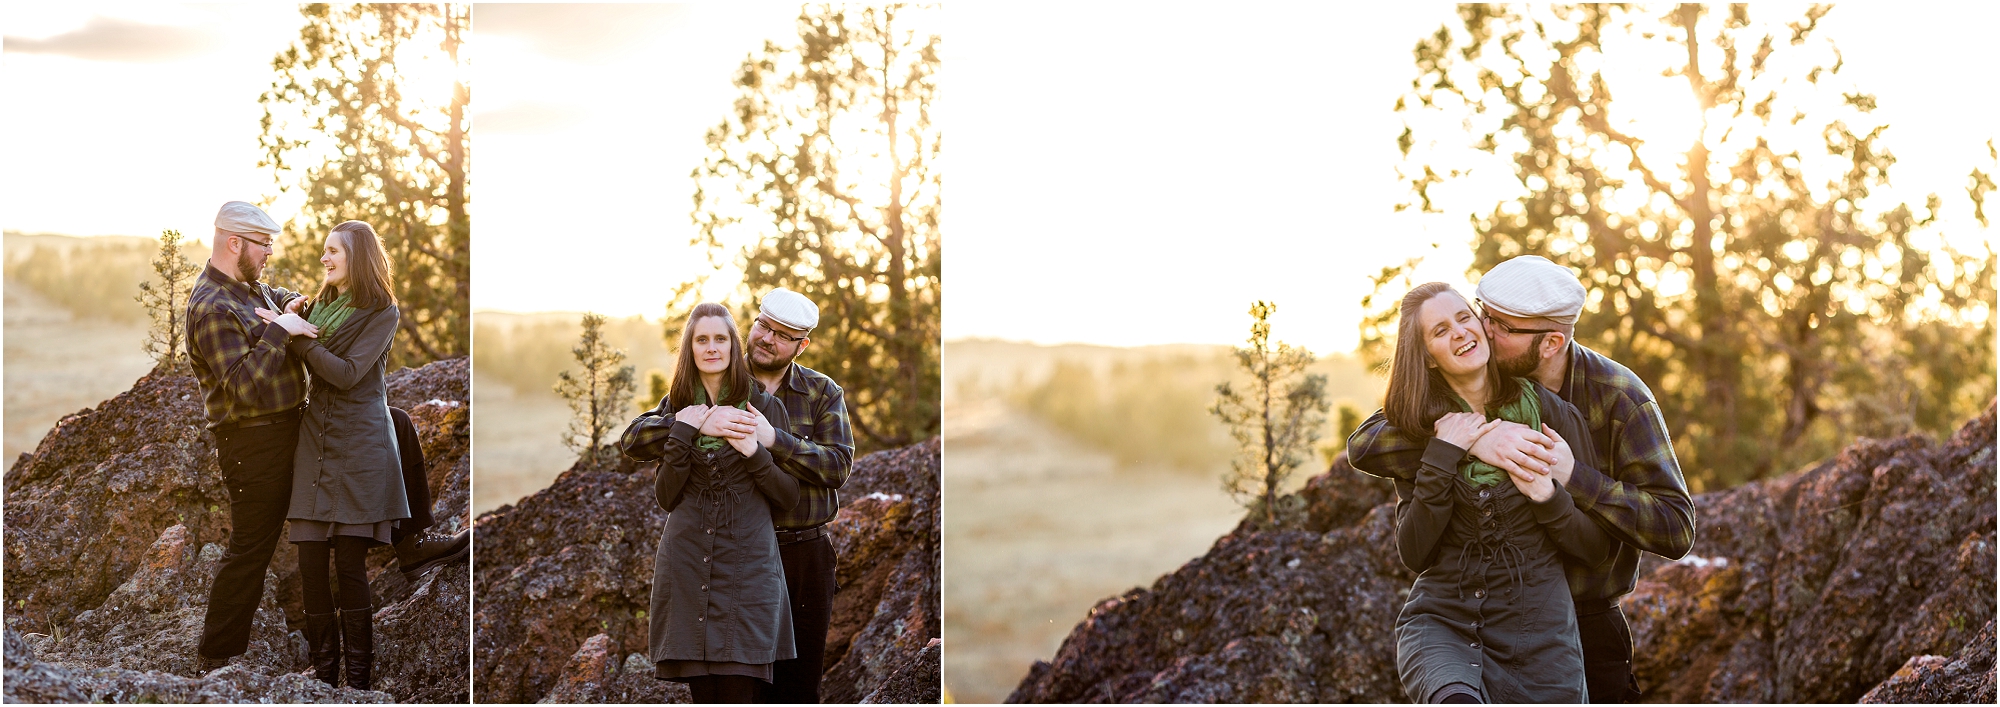 Amazing golden hour sunset light blankets this flannel wearing couple during their Bend Oregon engagement photo session. | Erica Swantek Photography